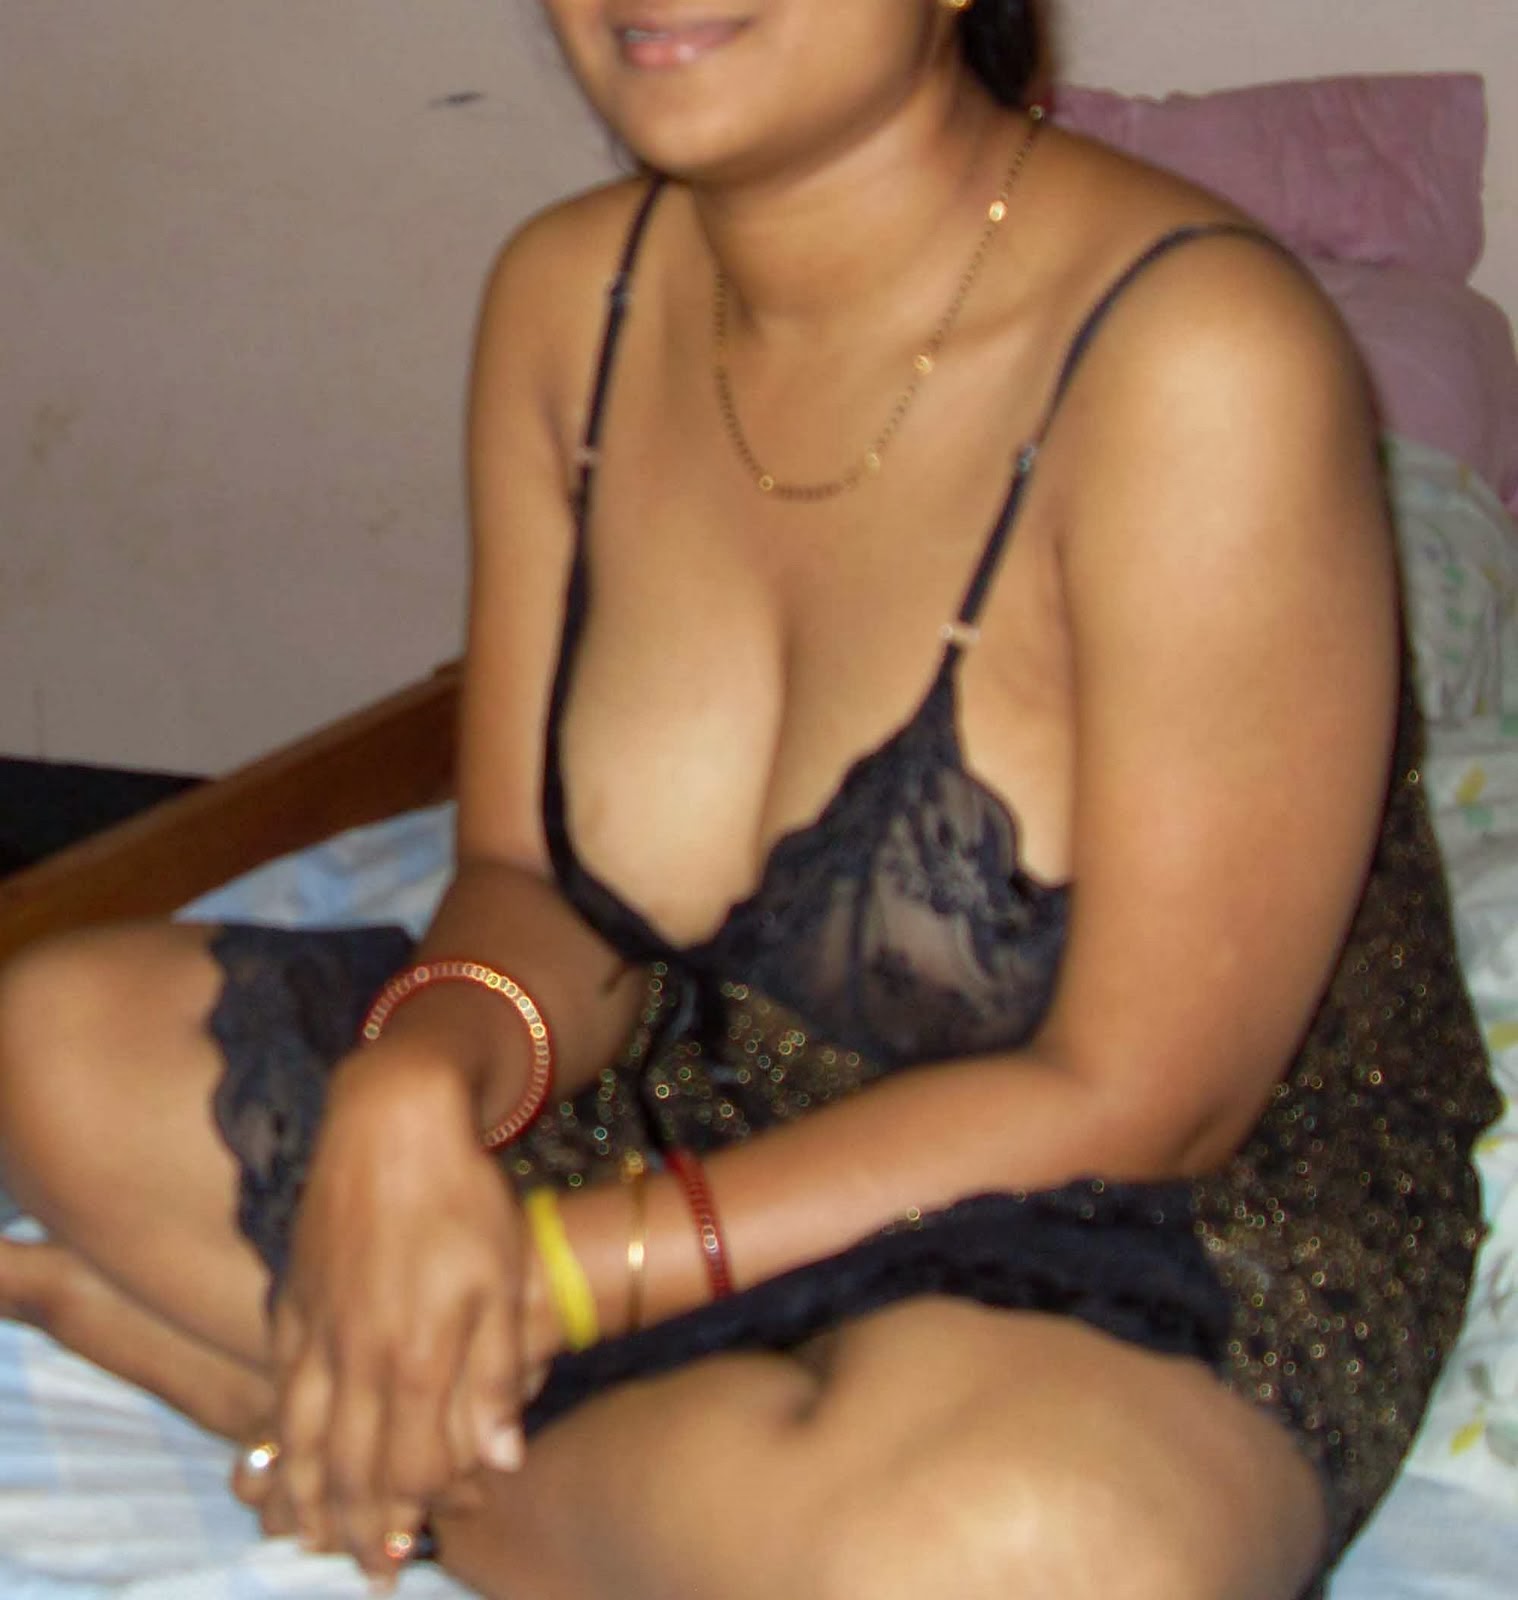 Latina Teen Hardcore Anal Pussy Fuck Indian housewife looking hot in transparent nighty pic pic